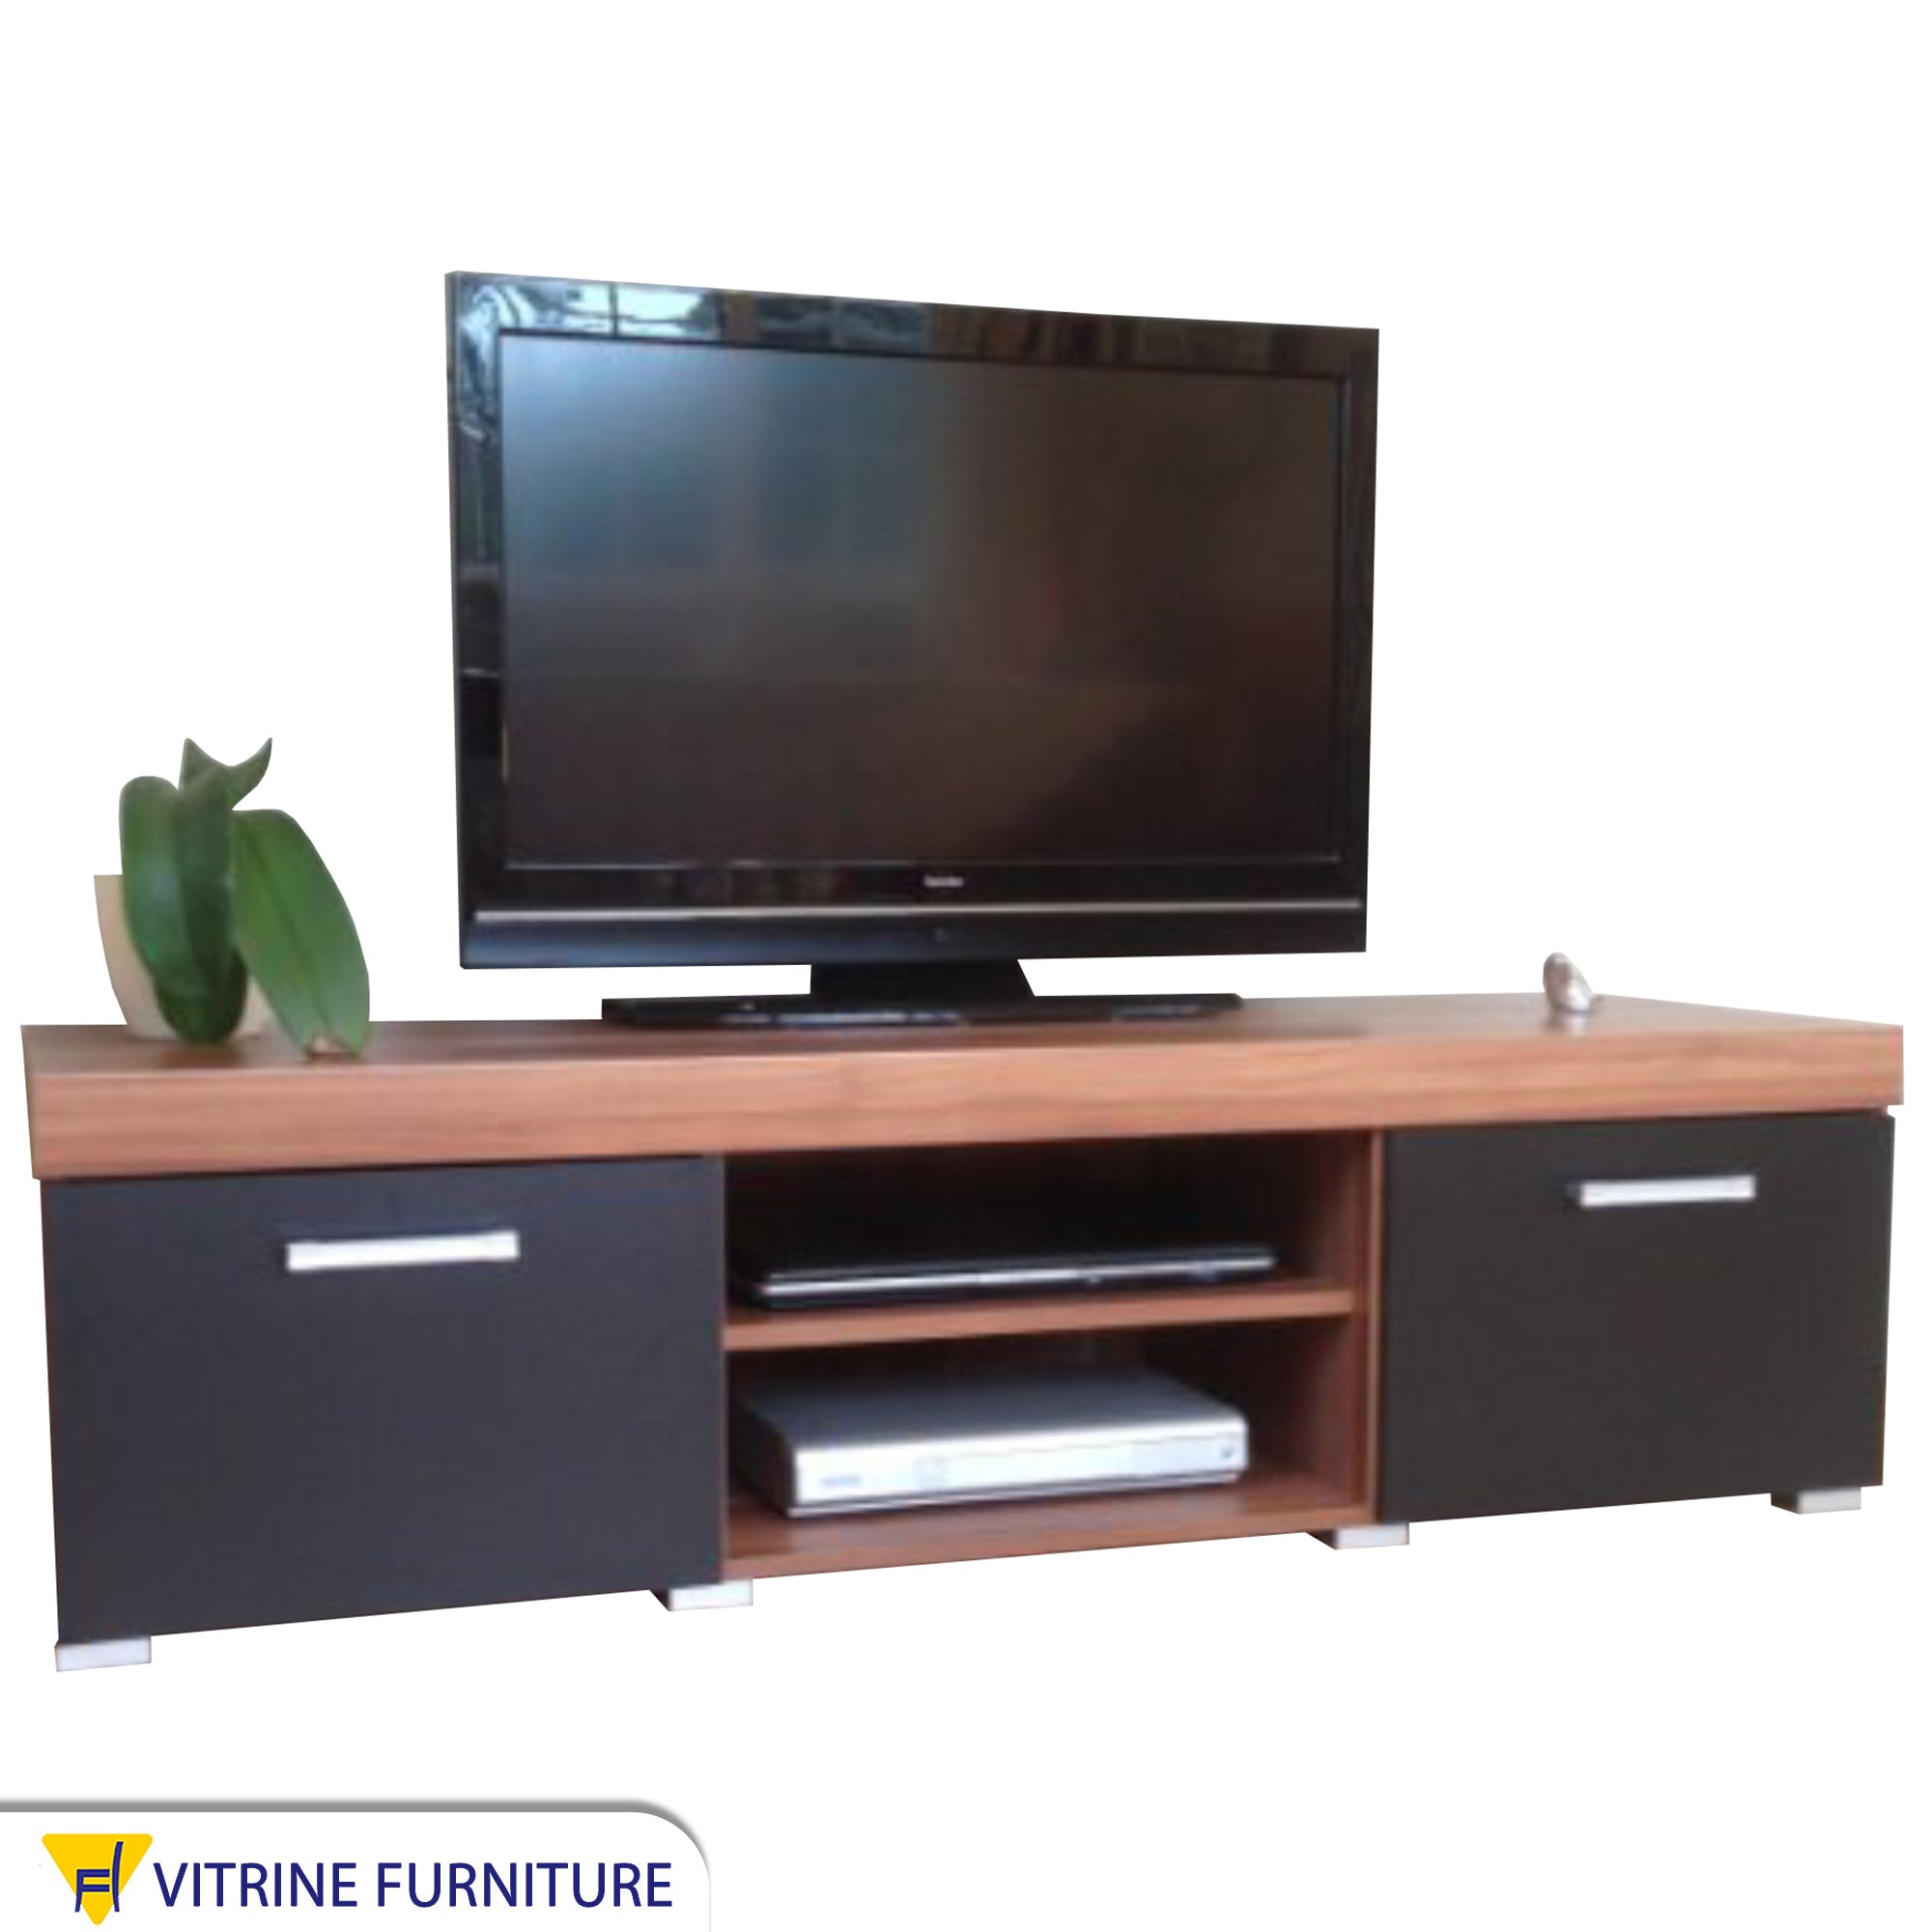 Black and brown wooden TV table with two storage spaces